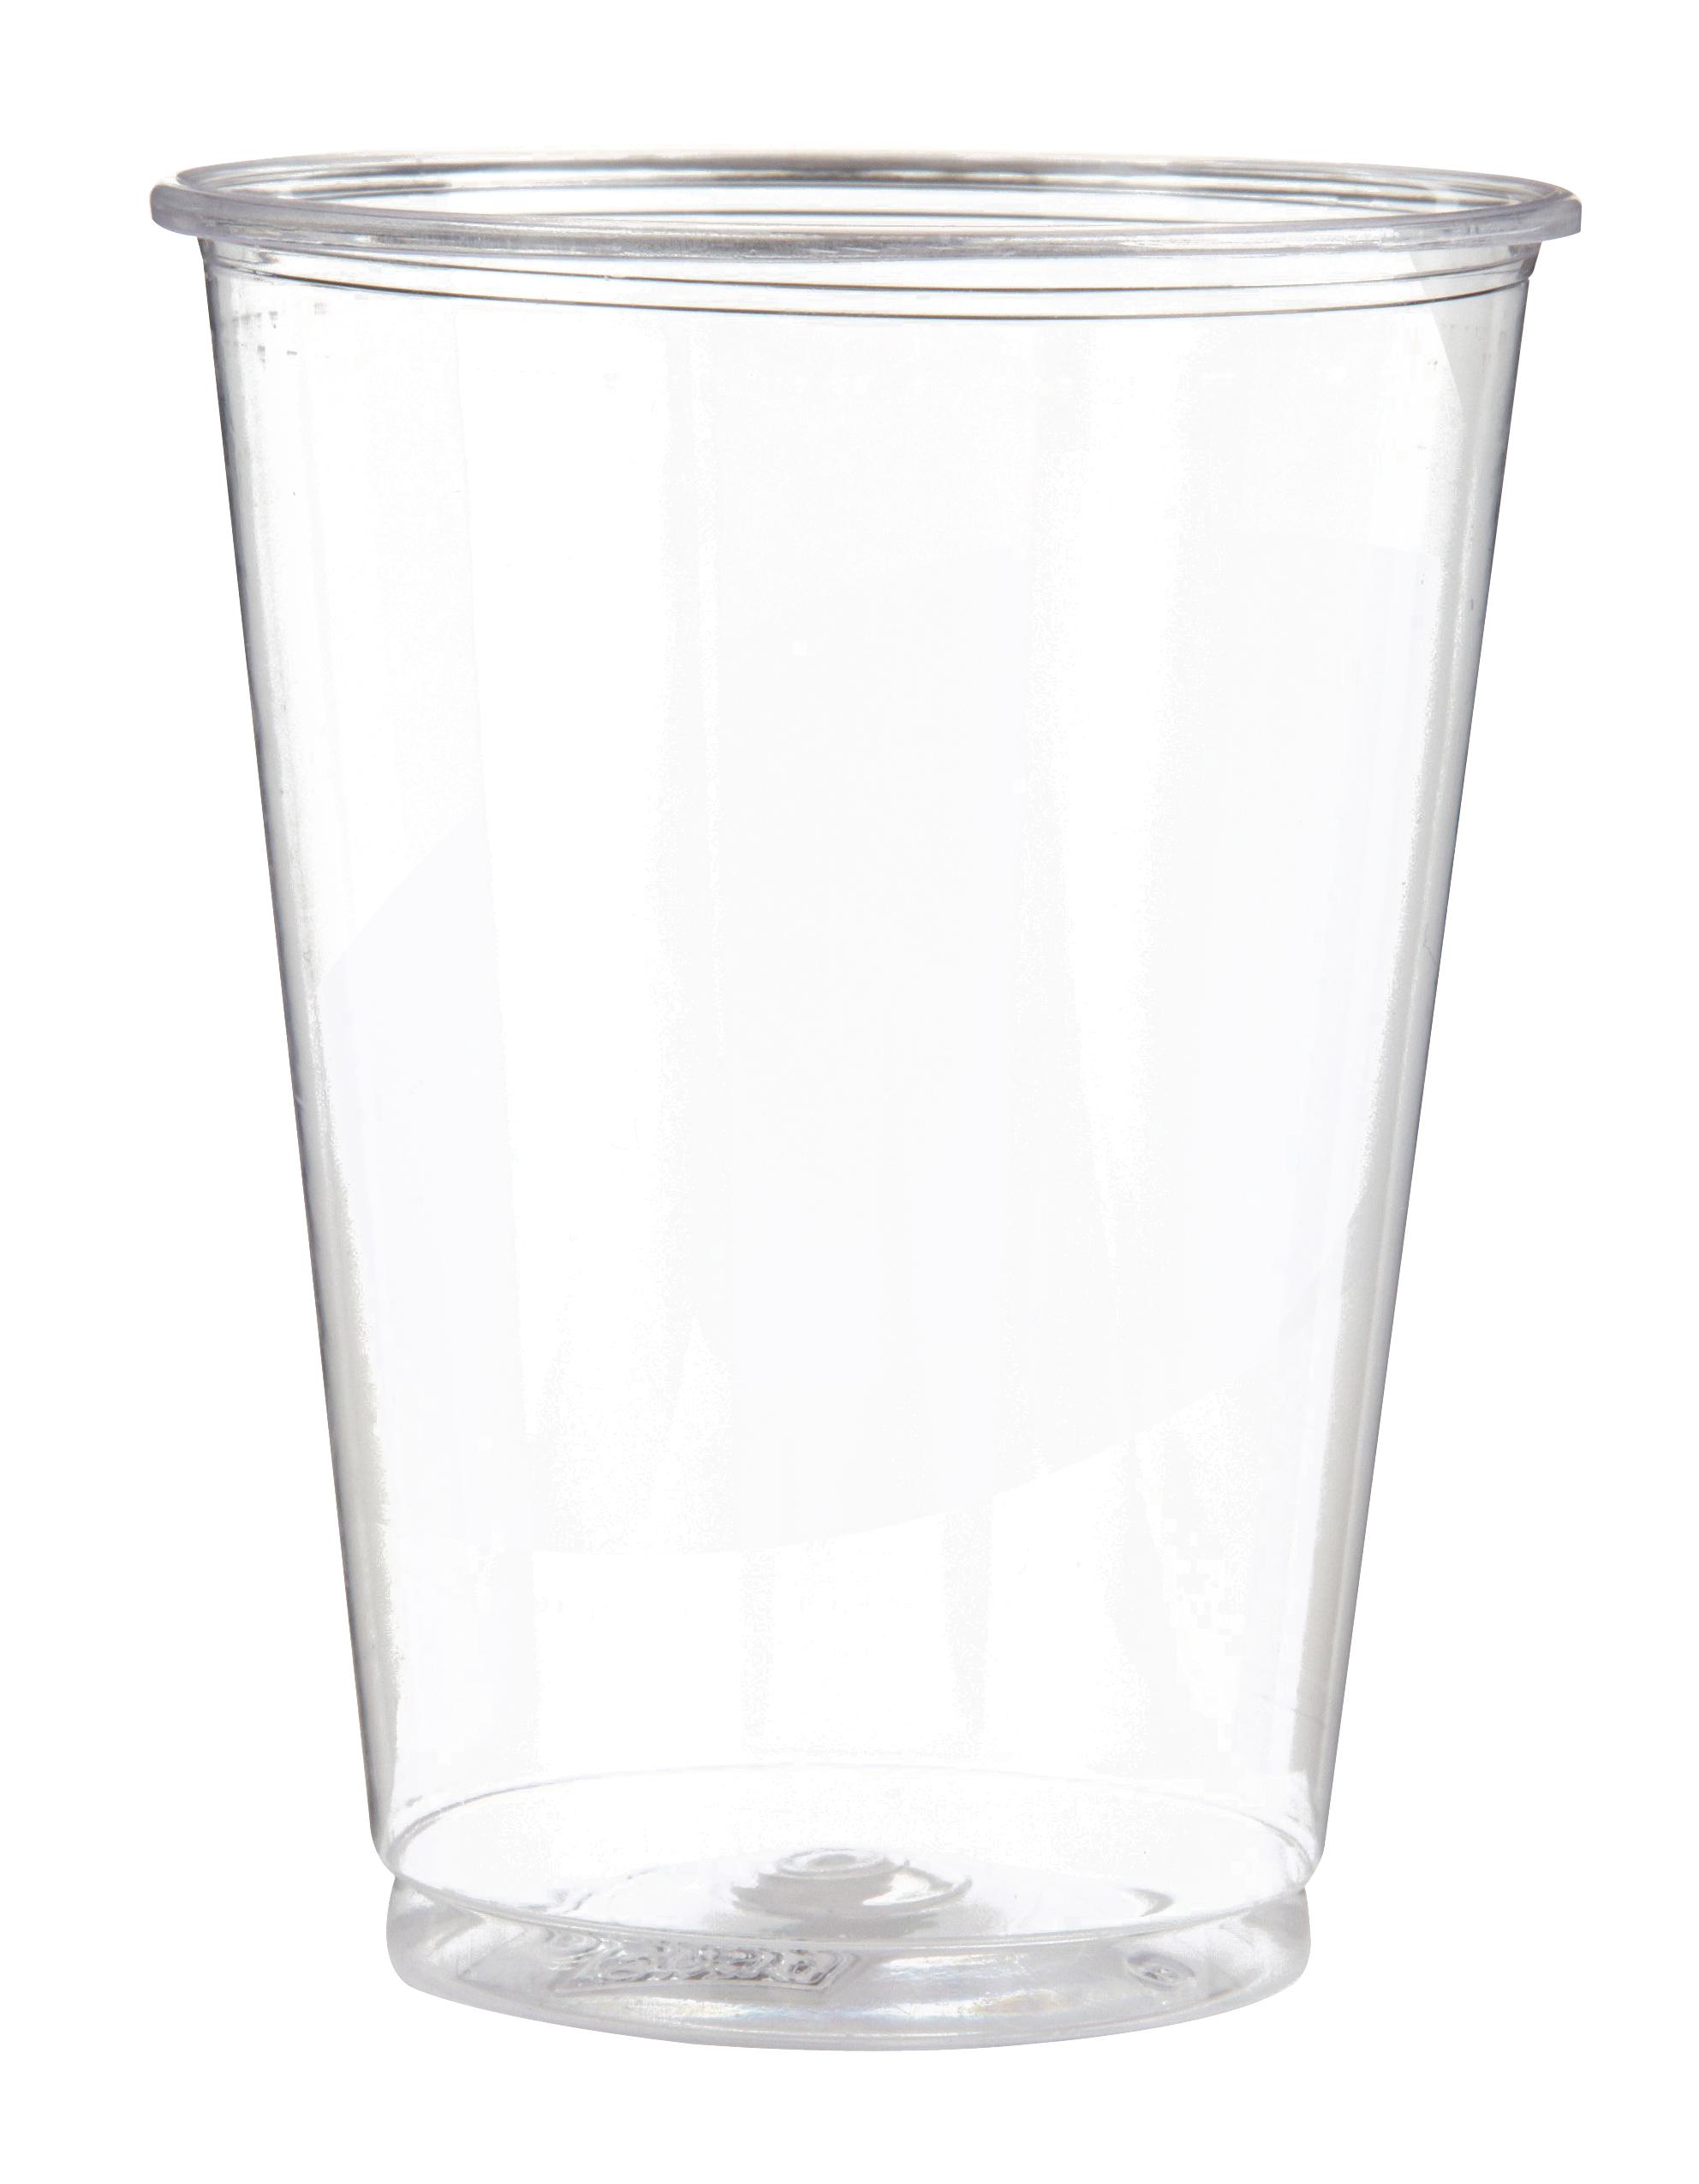 Plastic Cup PNG Image Plastic cup, Cup, Piece of pizza